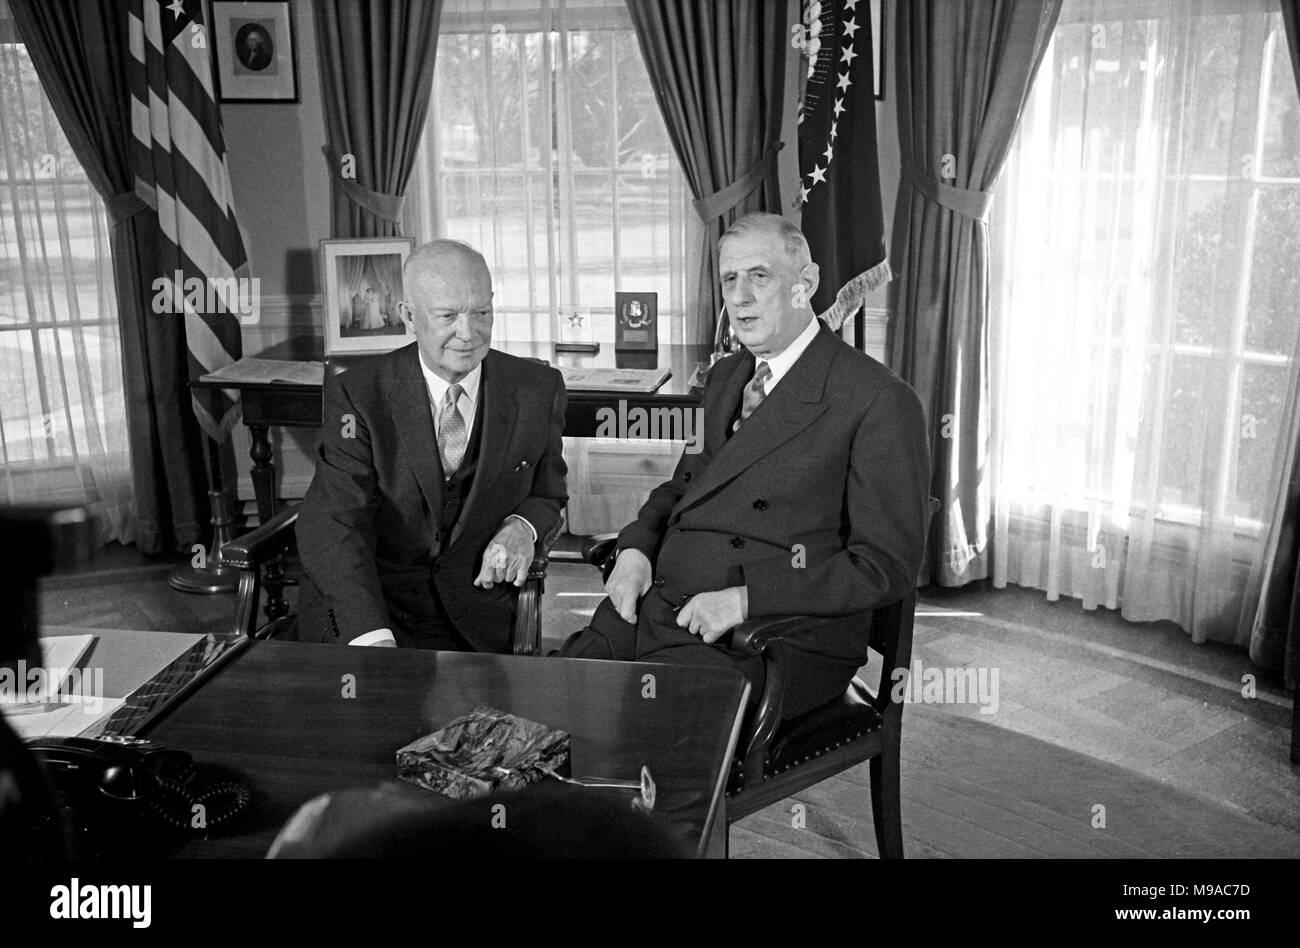 FILED - United States President Dwight D. Eisenhower, left, meets President Charles de Gaulle of France in the Oval Office of the White House in Washington, DC on April 25, 1960. Credit: Benjamin E. 'Gene' Forte/CNP - NO WIRE SERVICE · Photo: Benjamin E. 'gene' Forte/Consolidated News Photos/Benjamin E. 'Gene' Forte - CNP Stock Photo